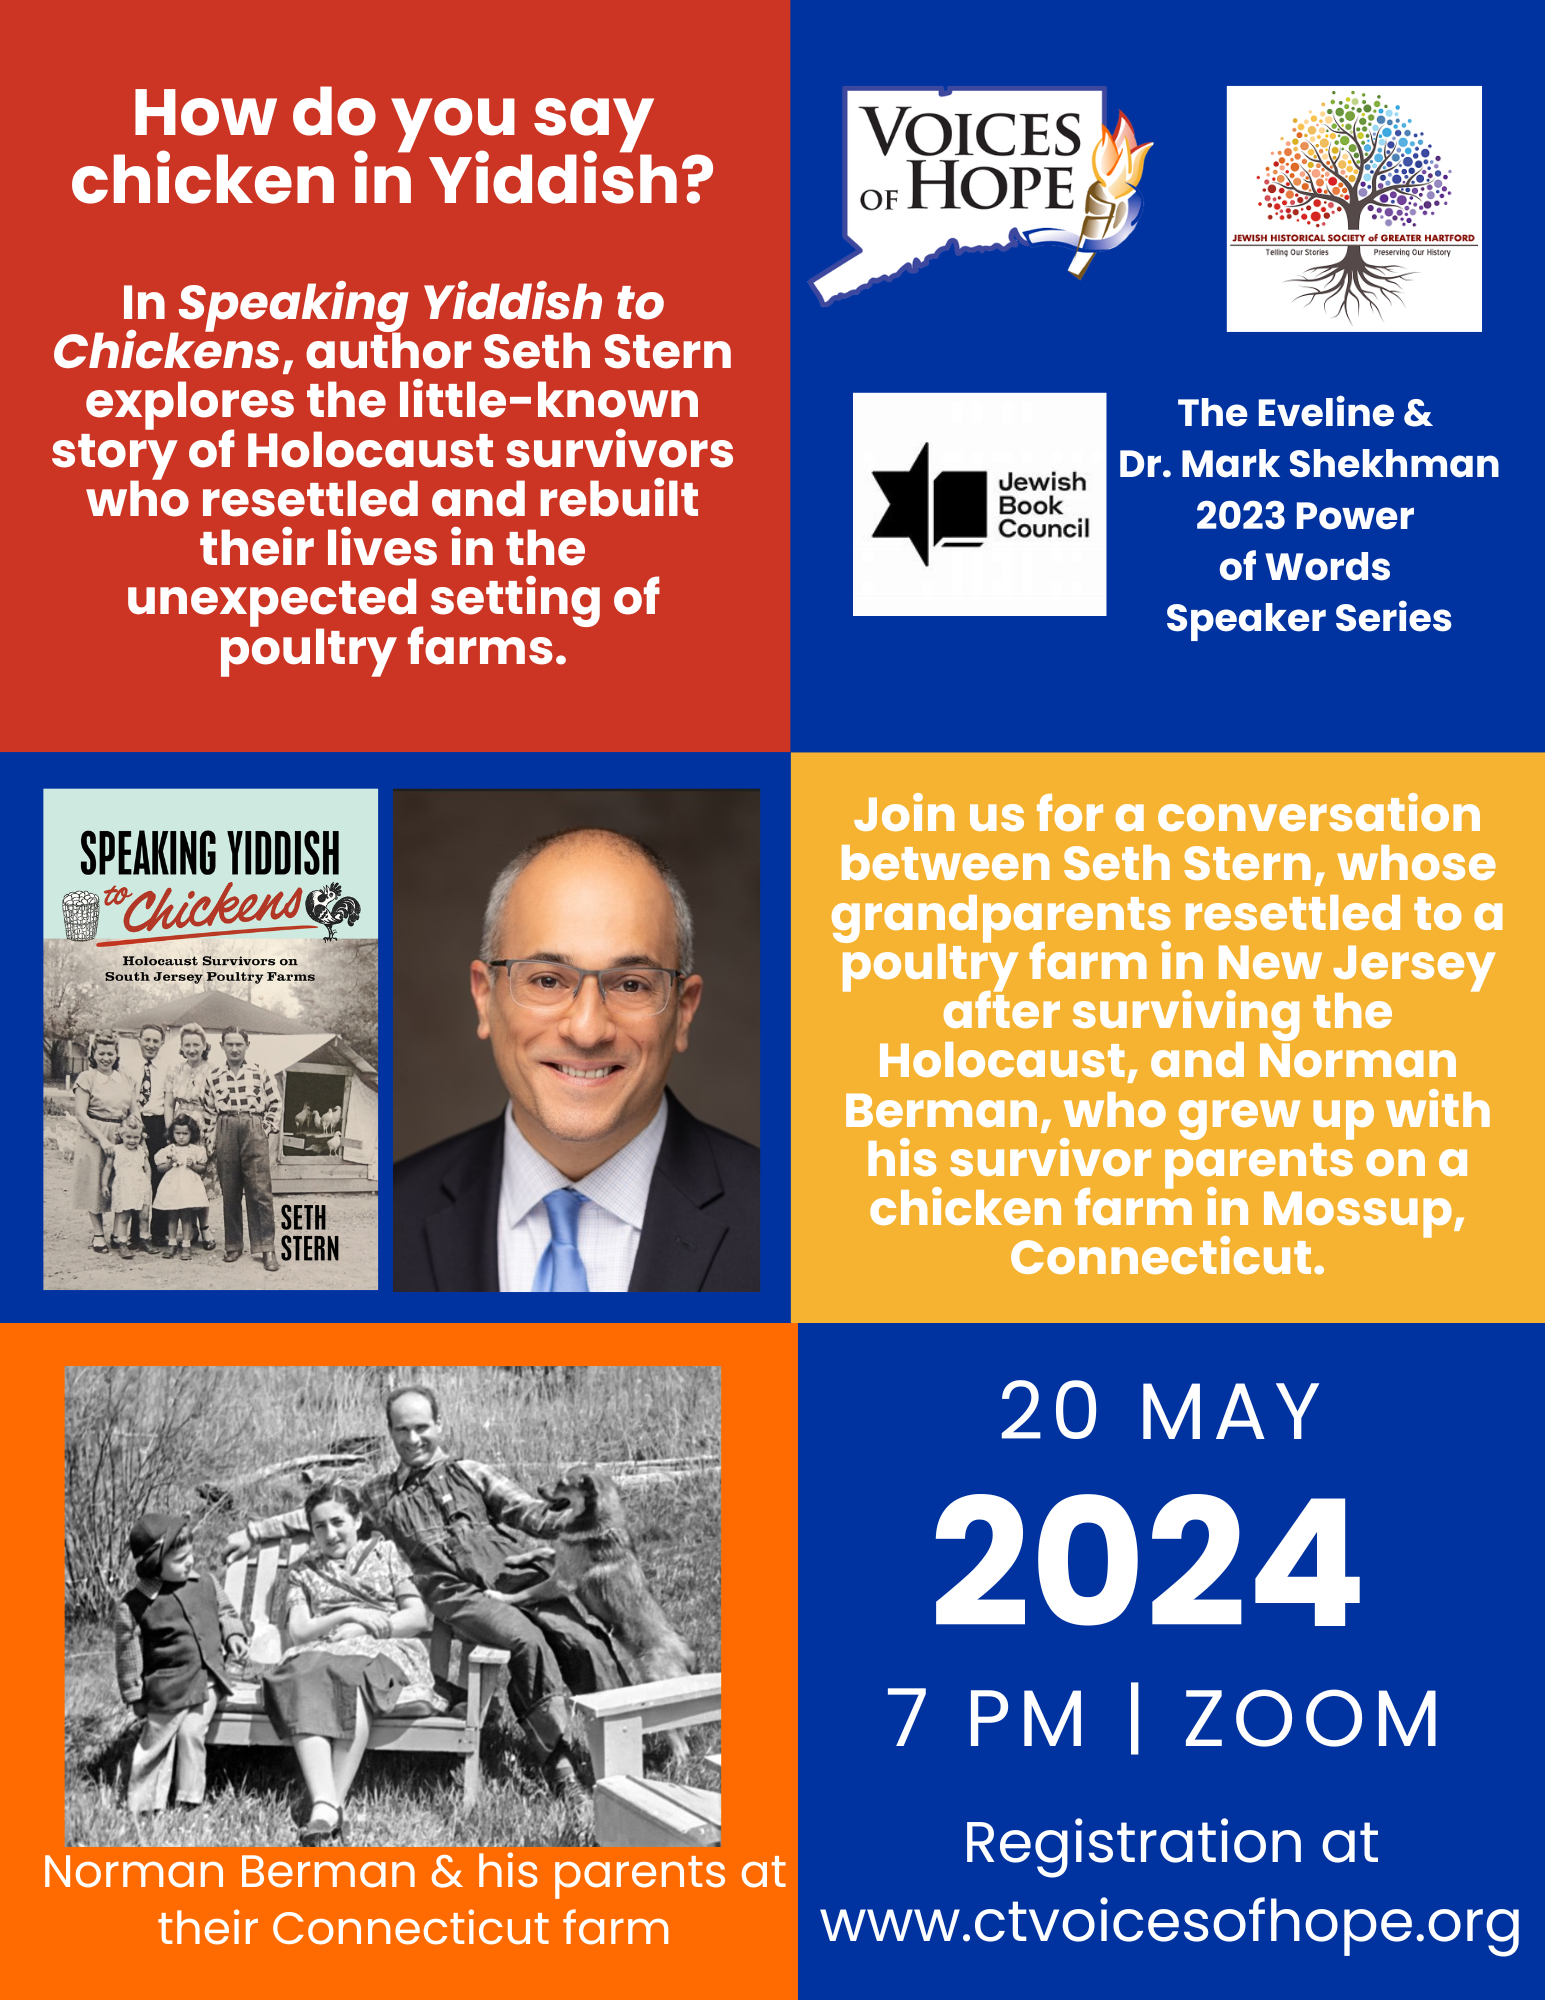 Speaker Series - Speaking Yiddish to Chickens with Seth Stern